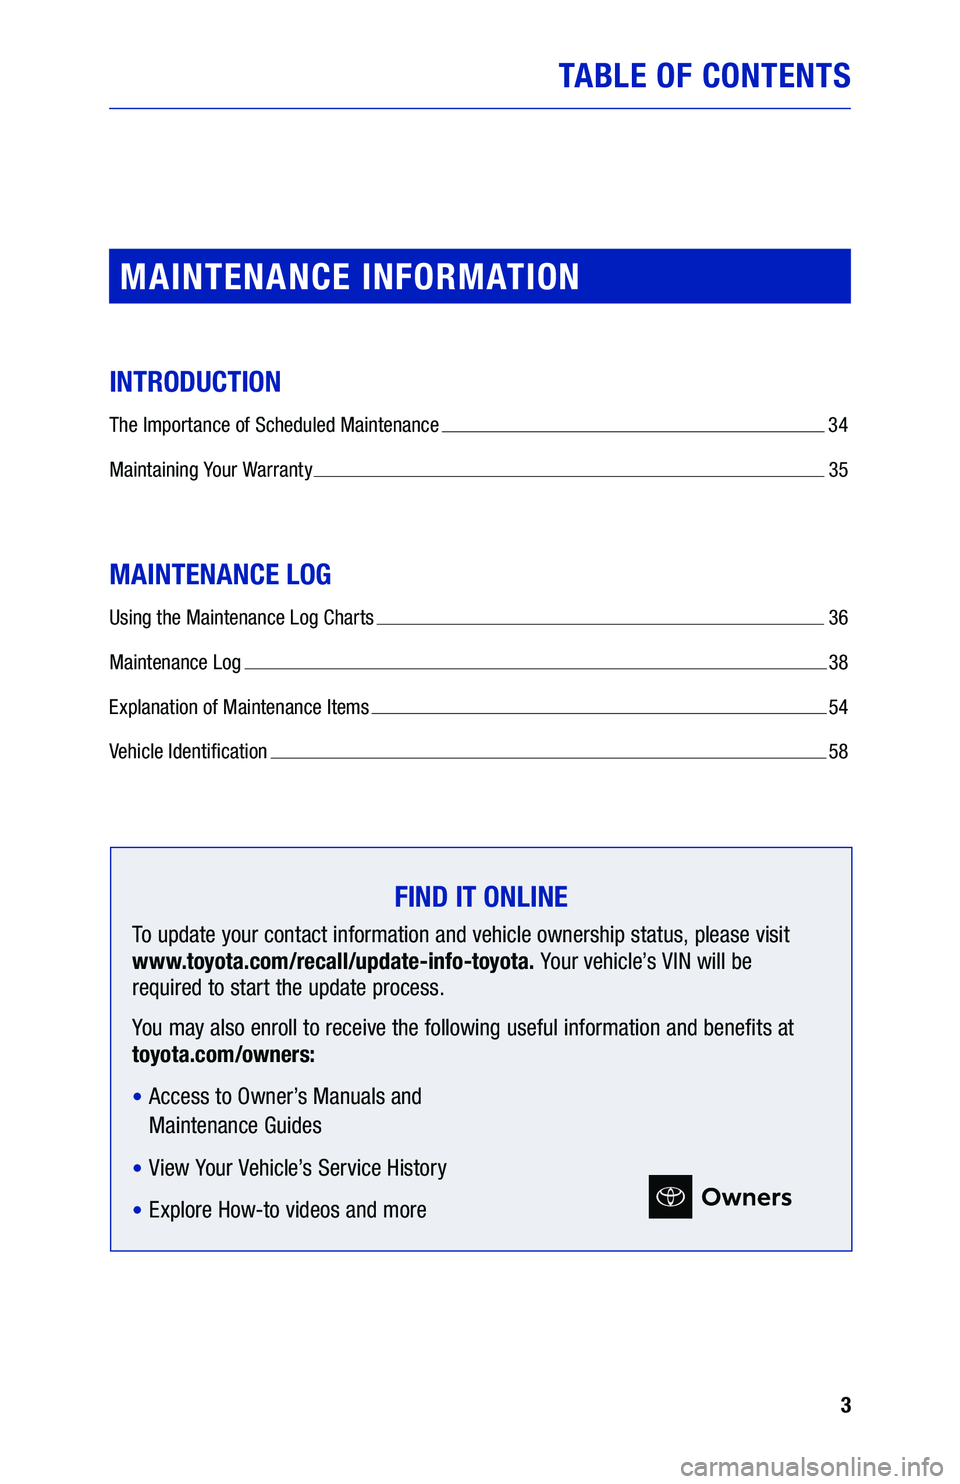 TOYOTA RAV4 2021  Warranties & Maintenance Guides (in English) 3
TABLE OF CONTENTS
MAINTENANCE INFORMATION
INTRODUCTION
The Importance of Scheduled Maintenance  34
Maintaining Your Warranty 
 35
MAINTENANCE LOG
Using the Maintenance Log Charts  36
Maintenance Log